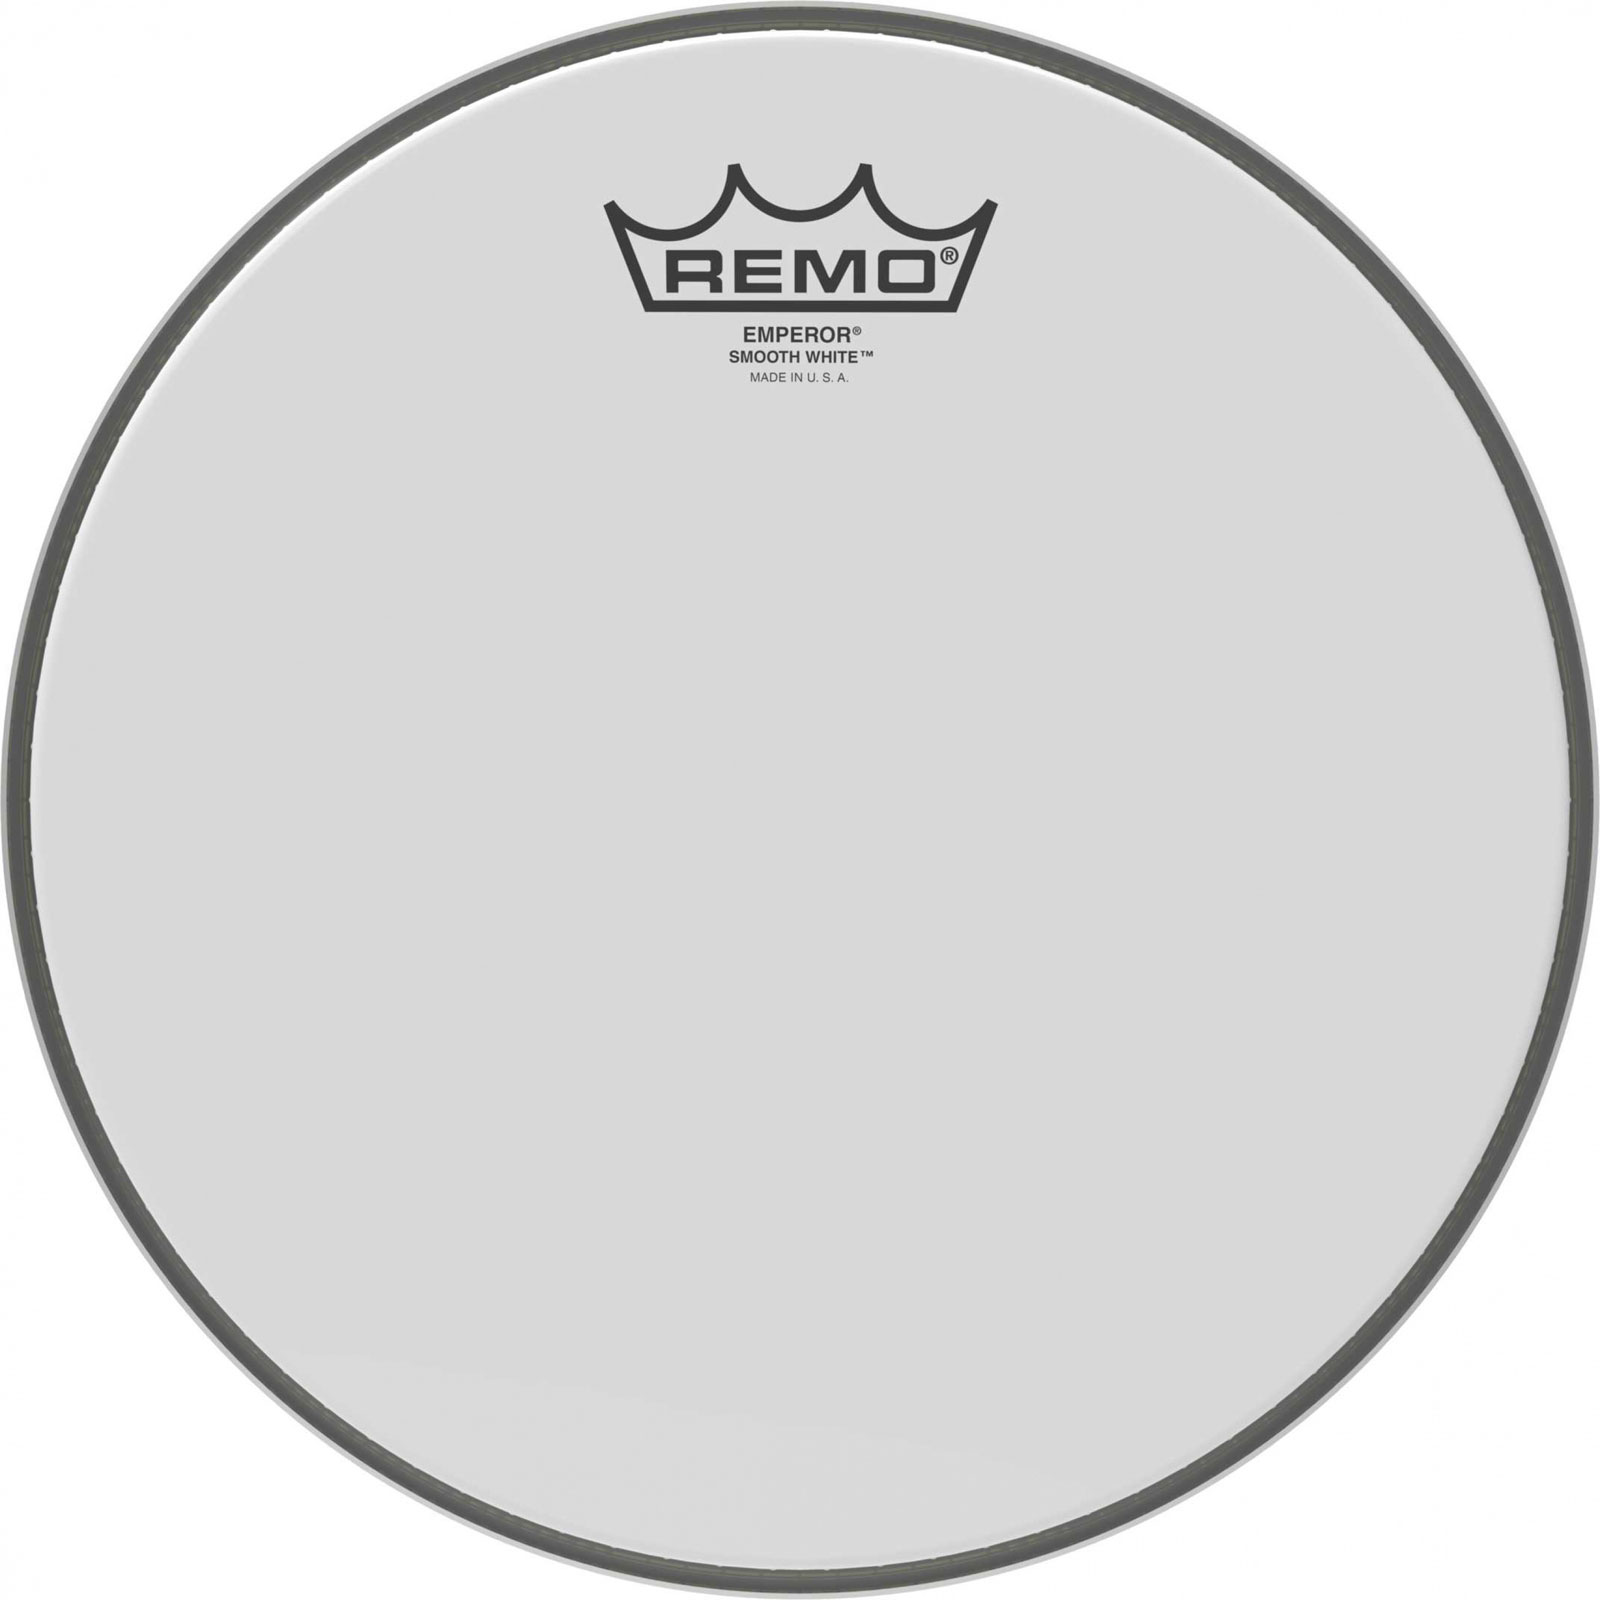 REMO BE-0210-00 - EMPEROR SMOOTH WHITE 10